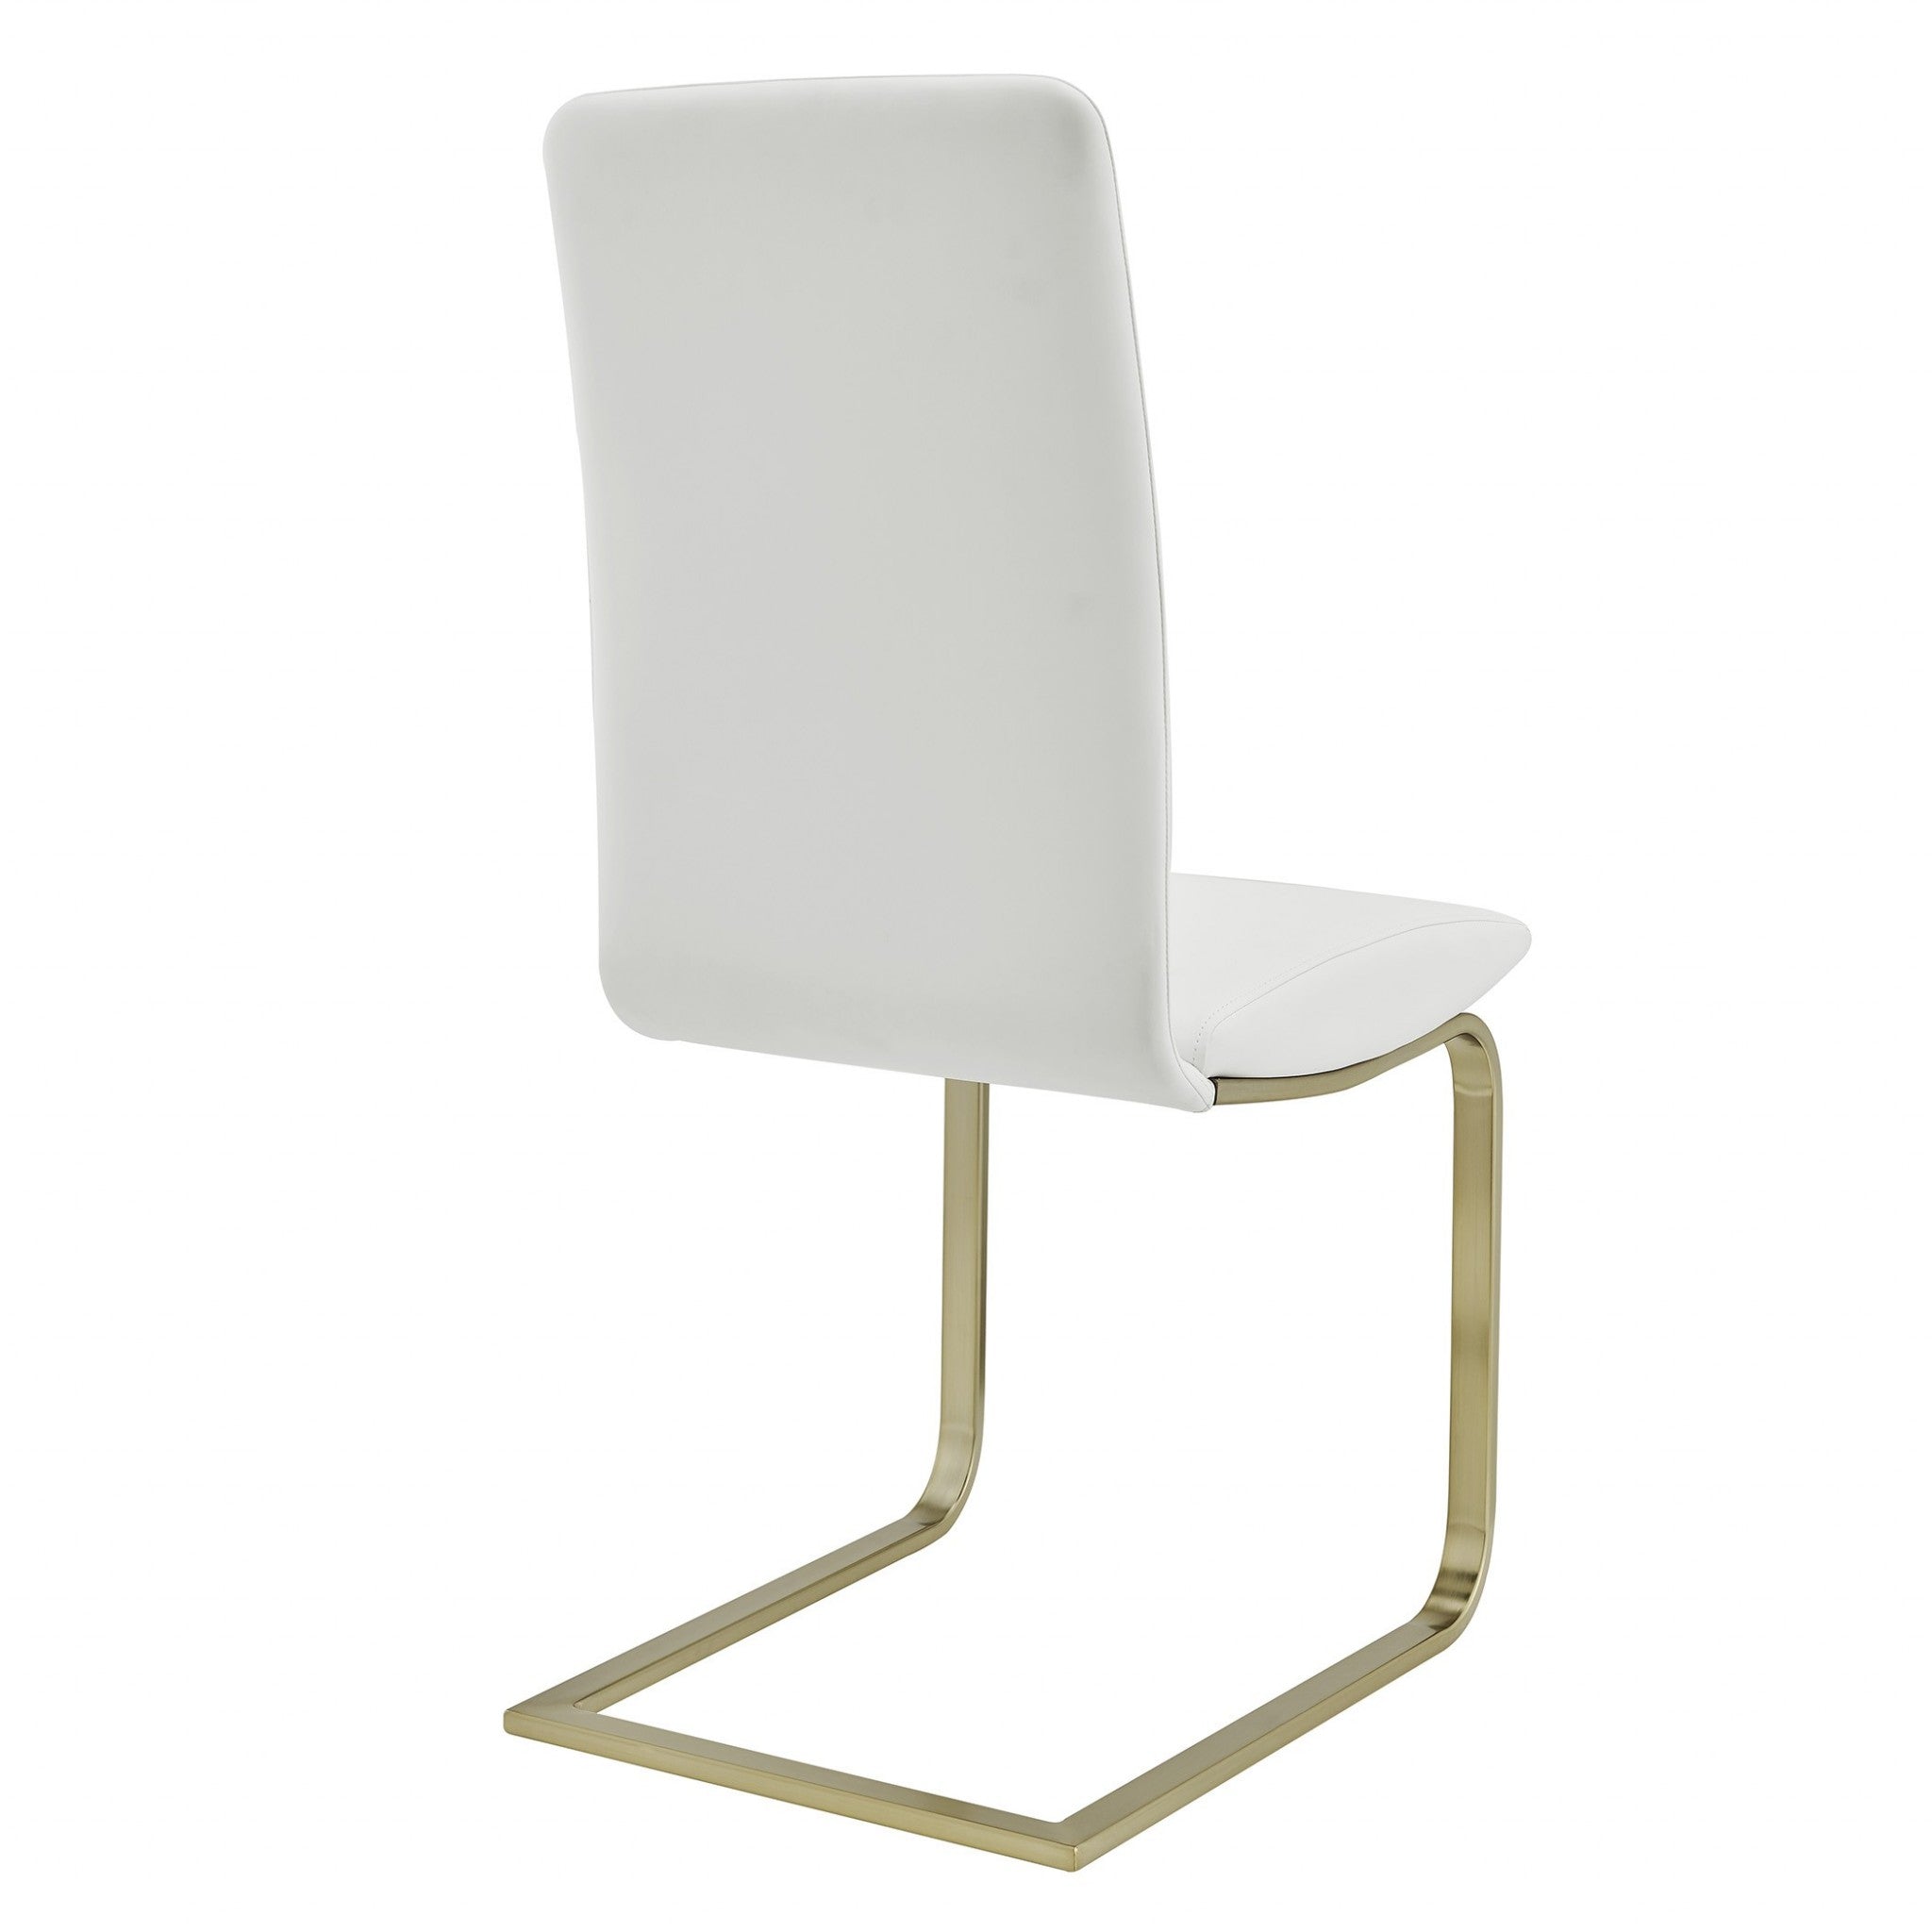 Set of Two Mod White and Gold Dining Chairs